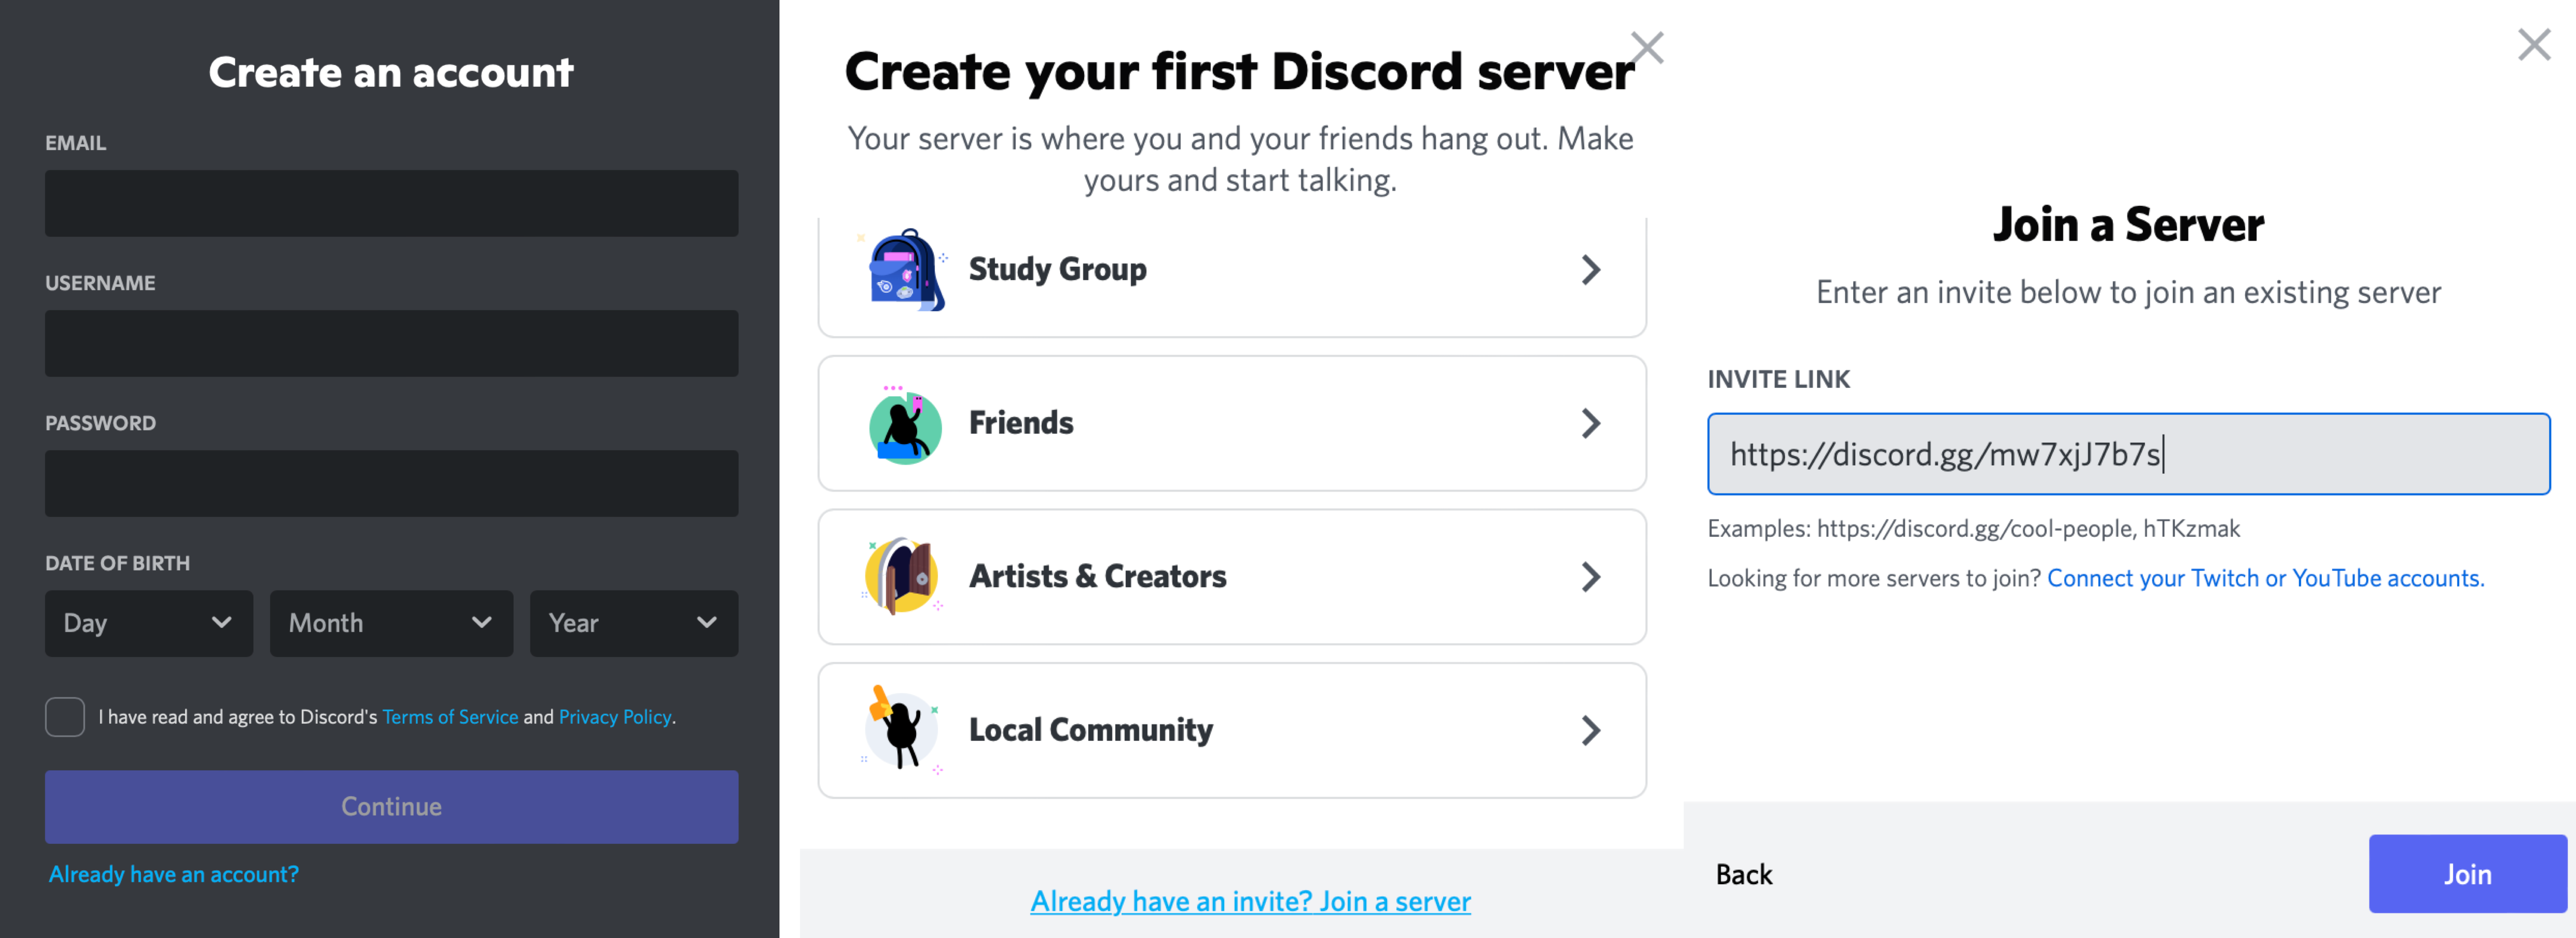 You can also join DCAI when creating your Discord account